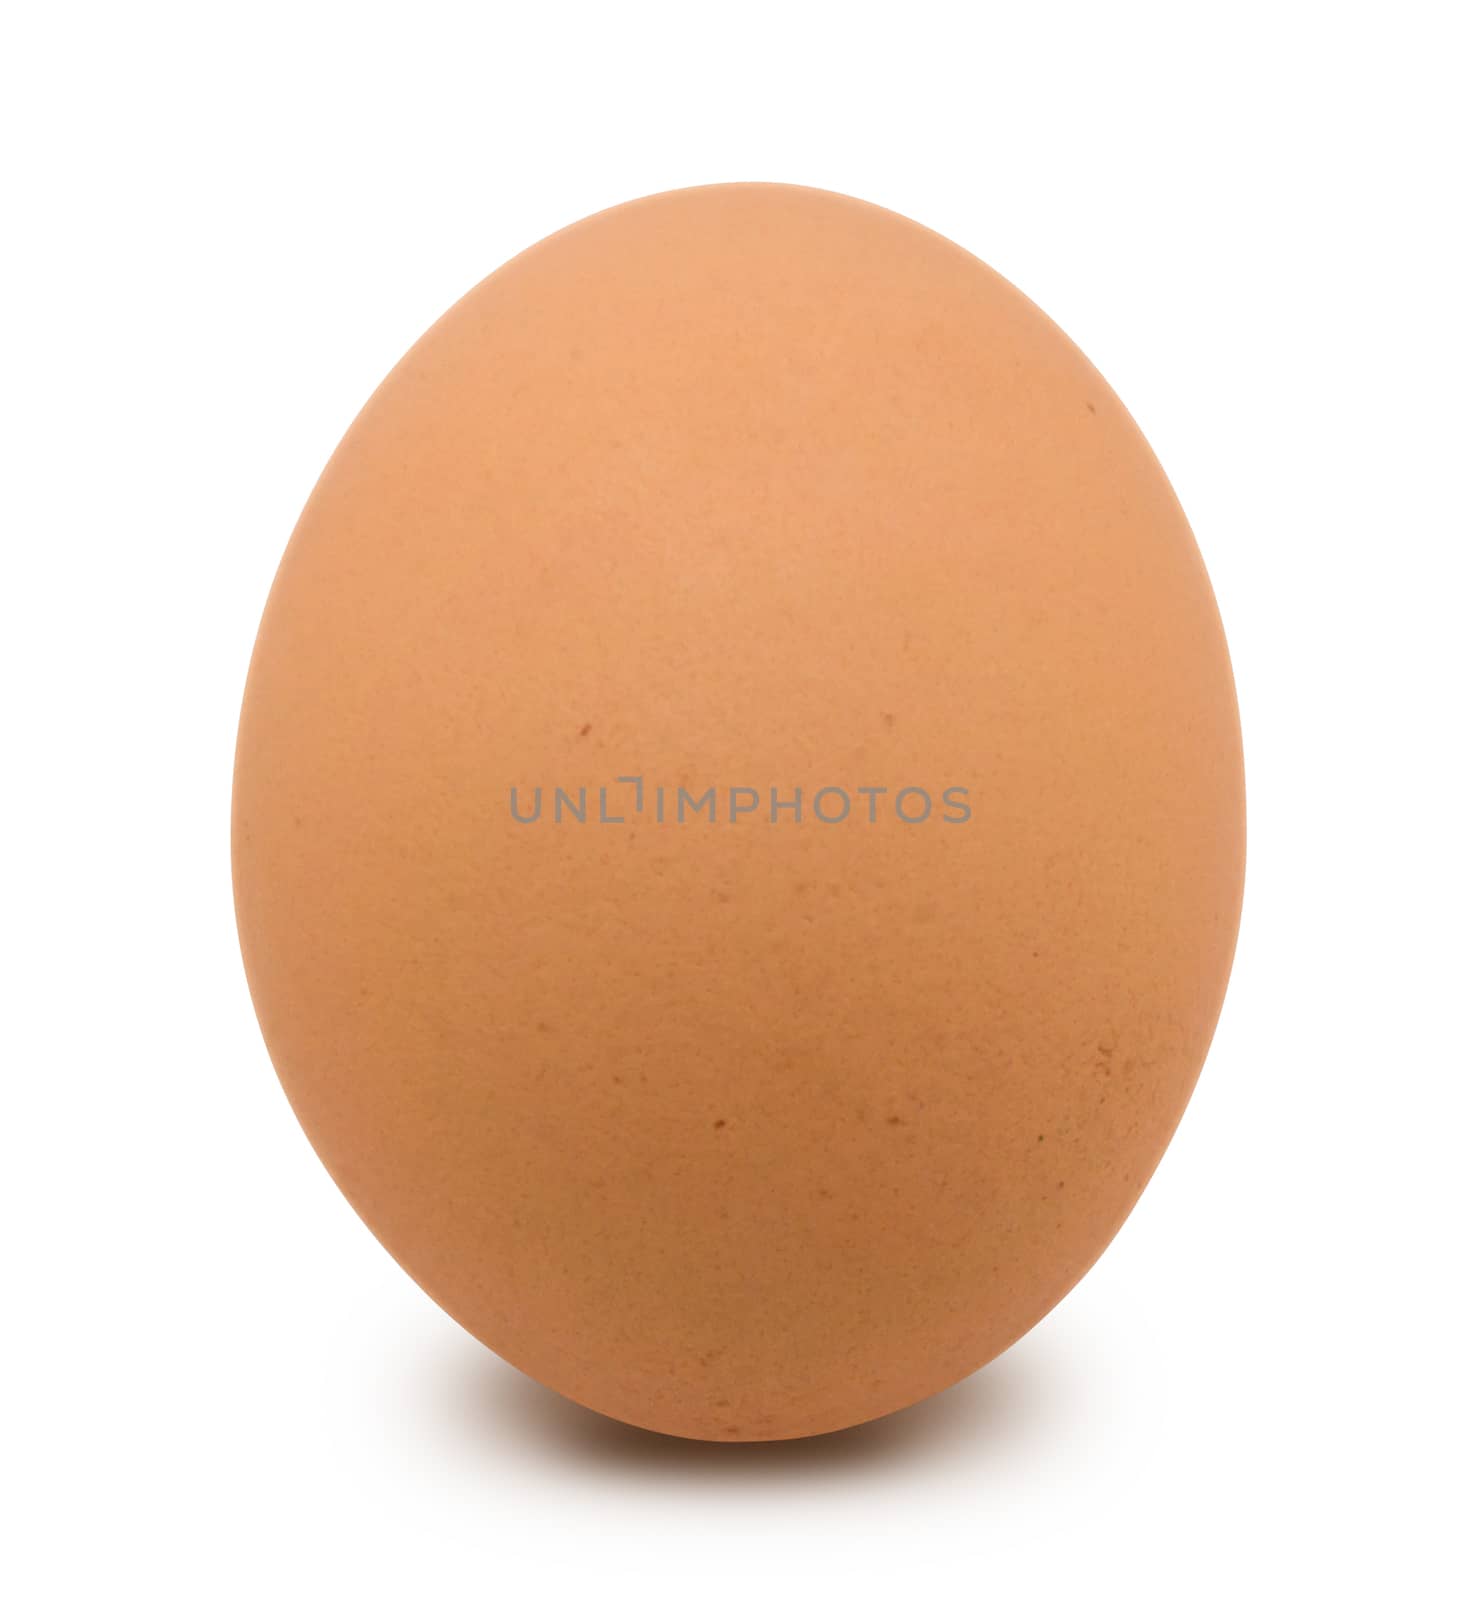 Close up of egg on white background with clipping path.